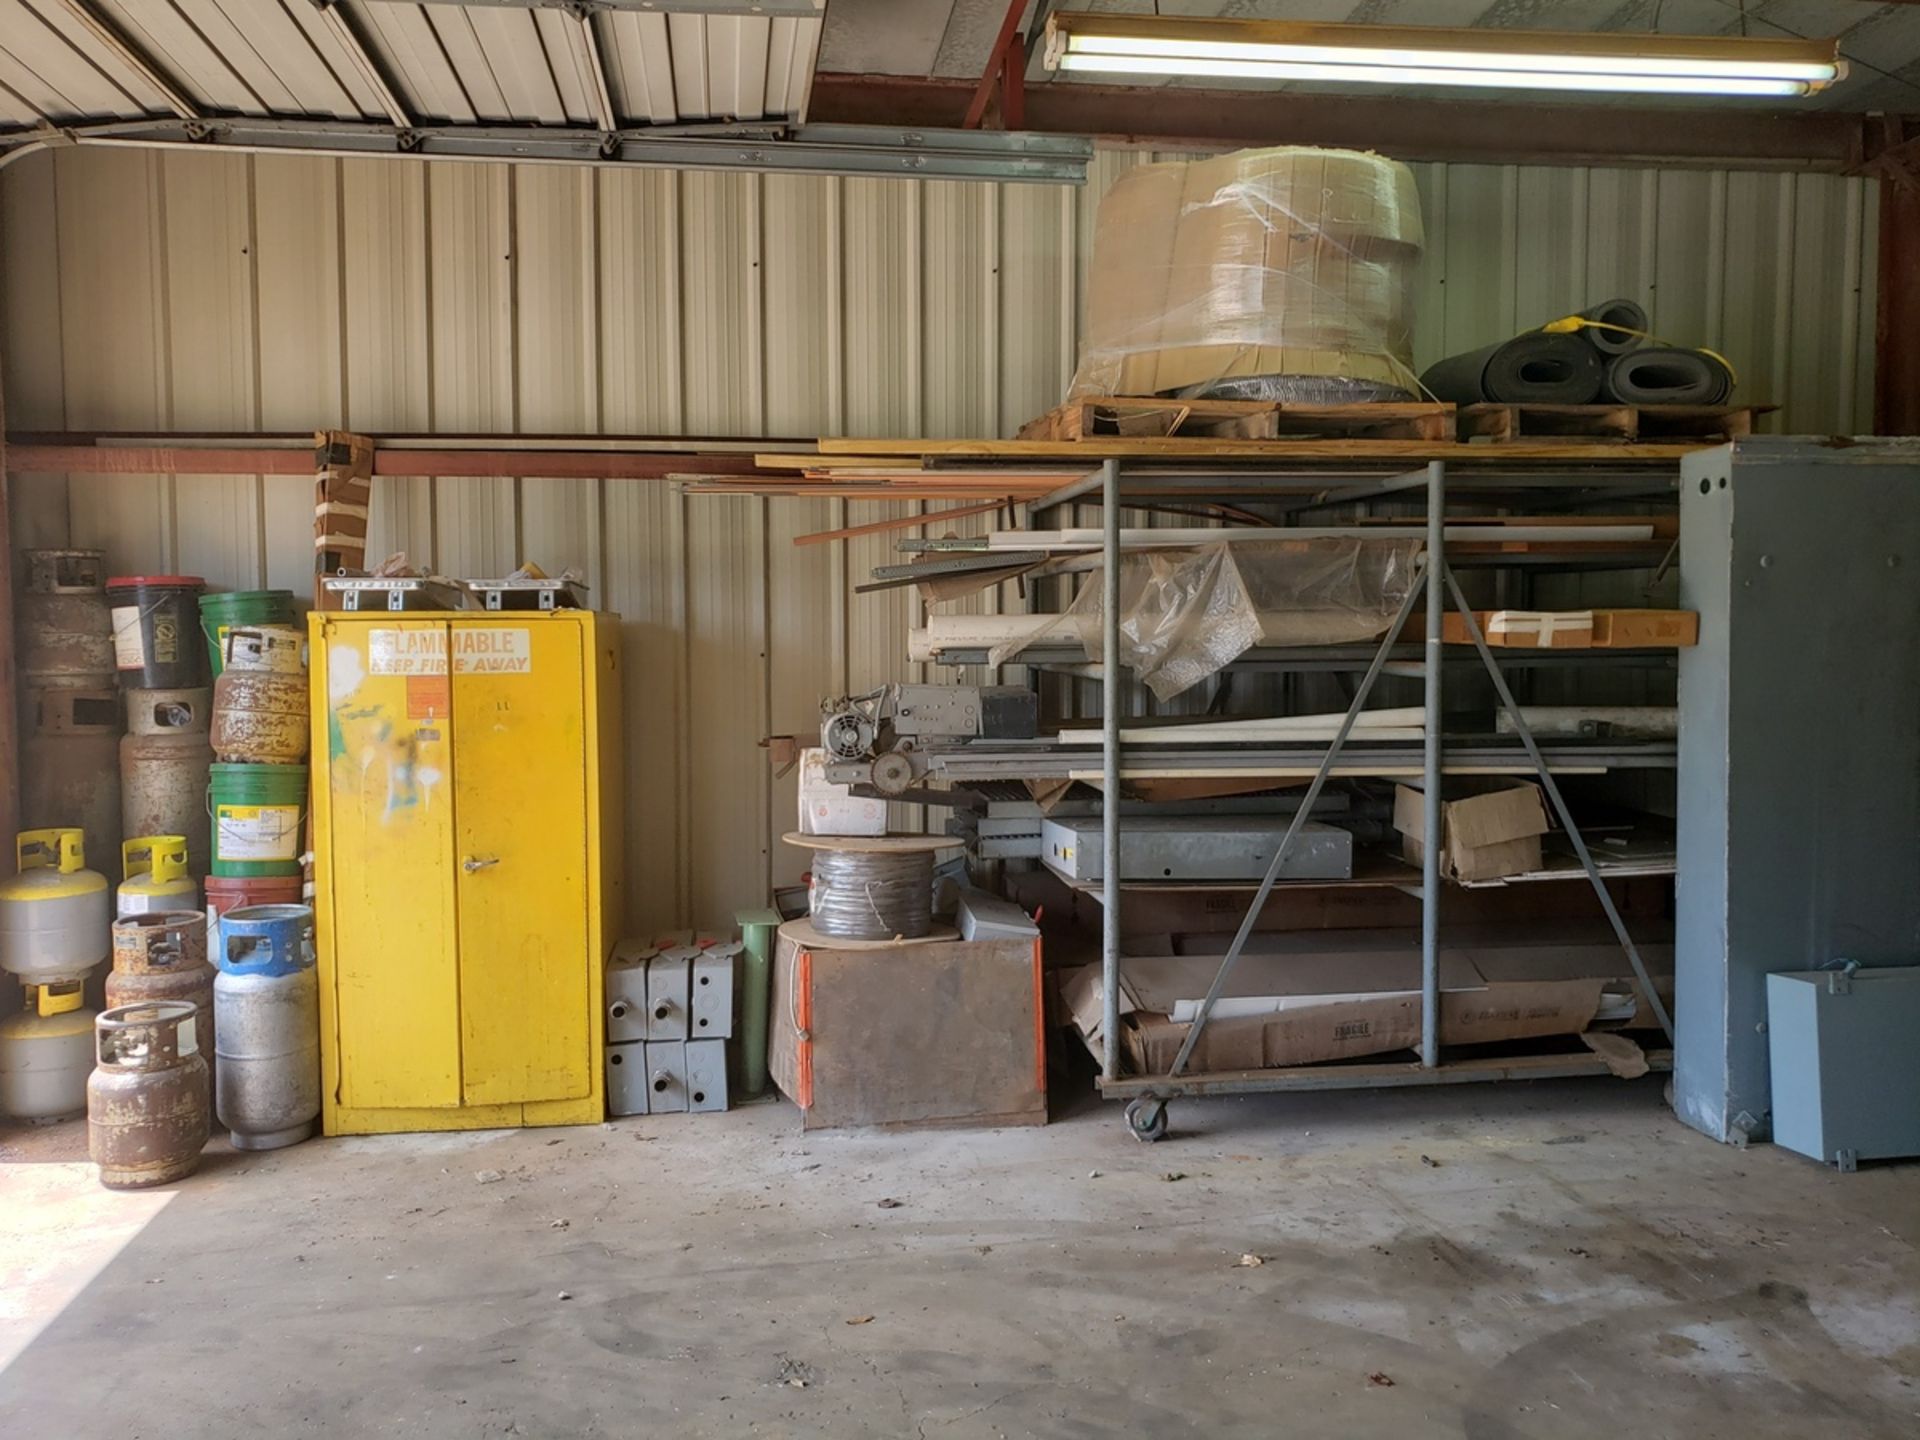 Contents of Outside Storage Shed | Rig Fee: $350 - Image 2 of 5